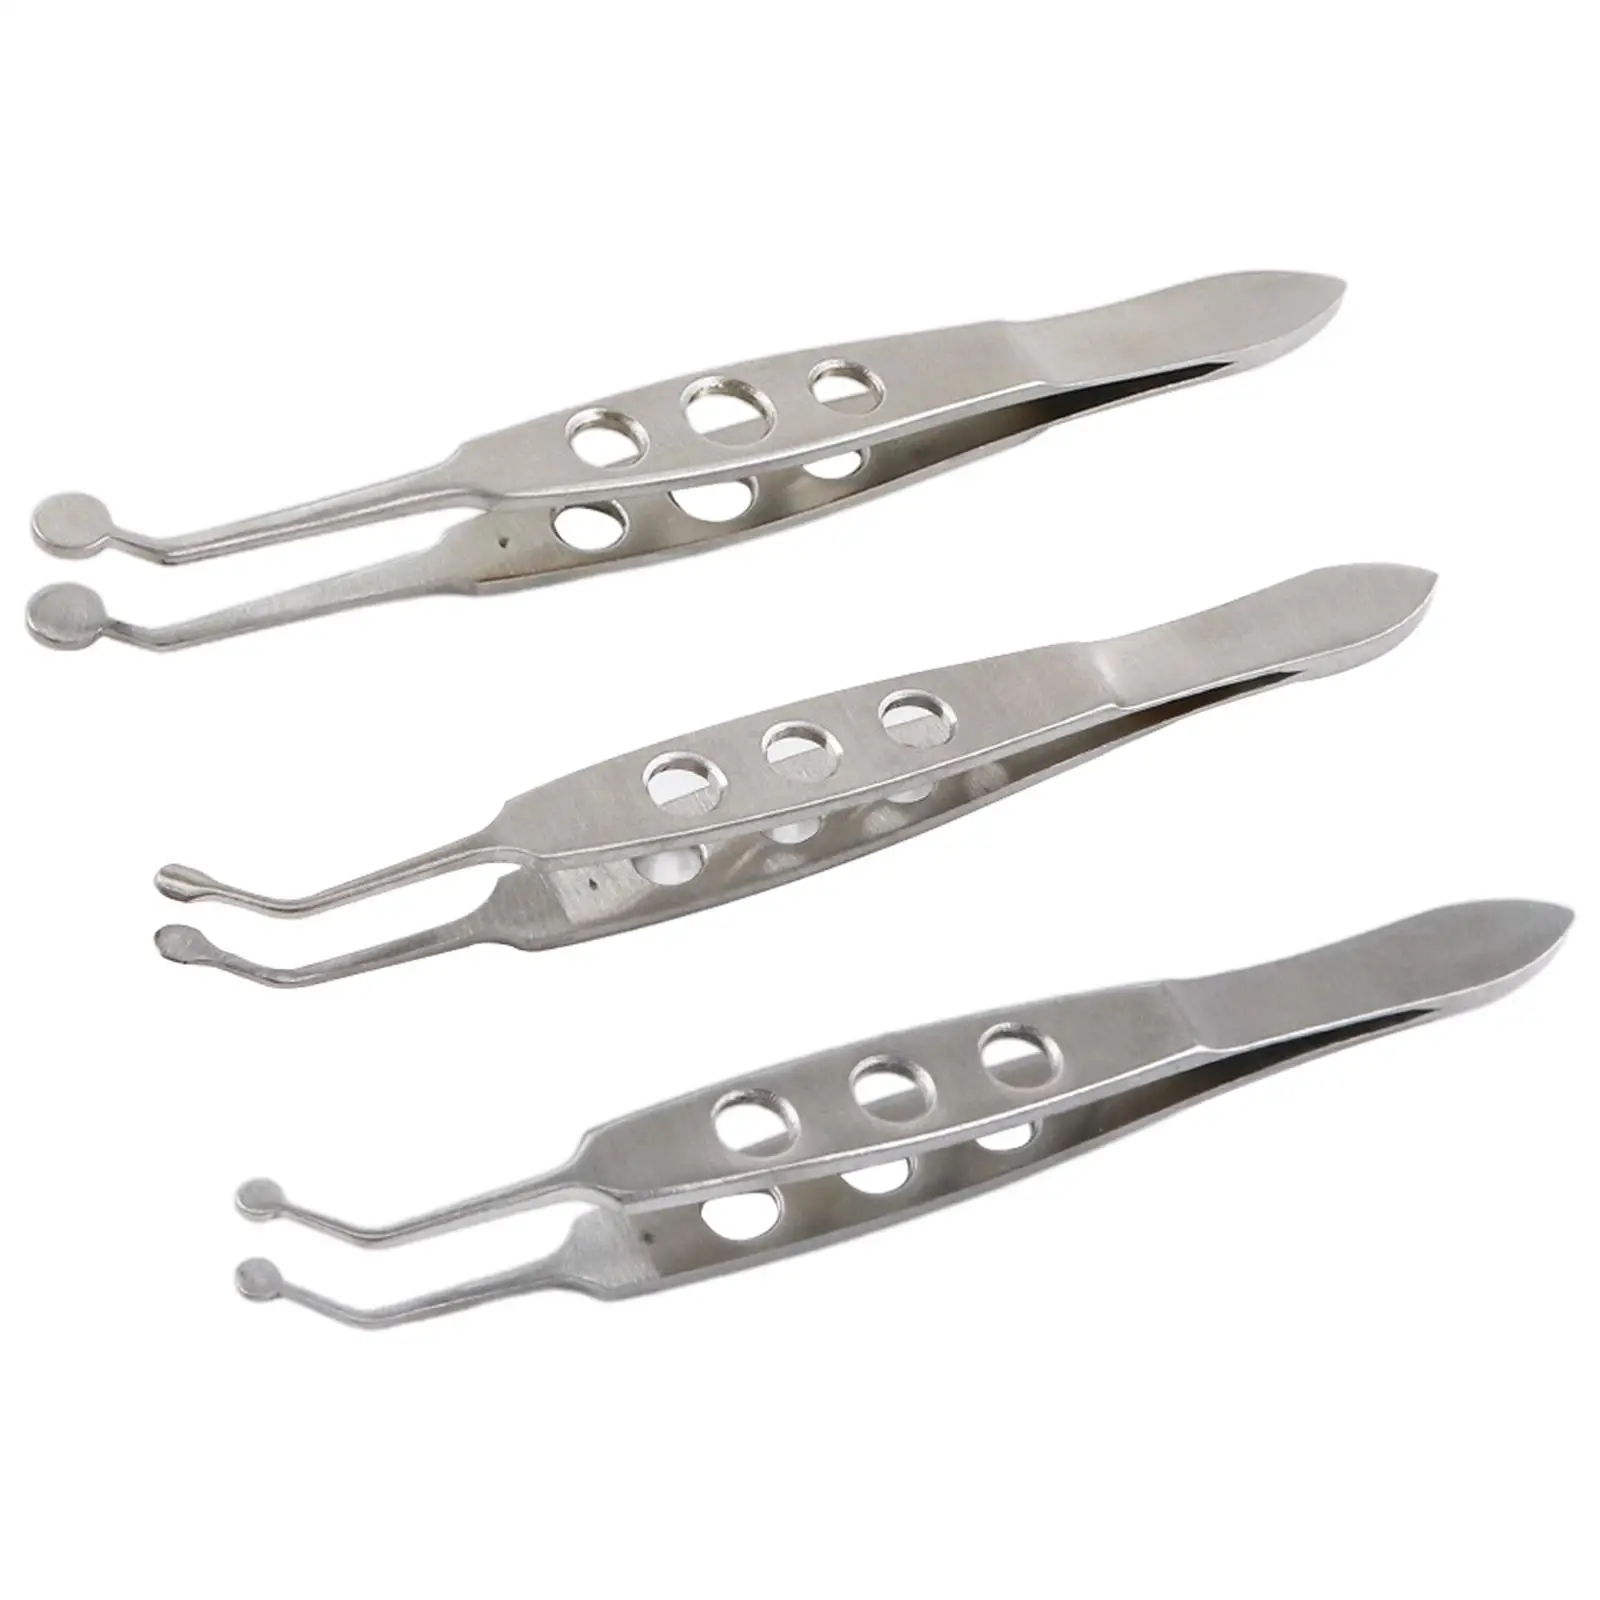 Meibomian Gland Expressor Forceps Ophthalmological Stainless Steel Tweezer Tools Clip for Palpebral Gland Massage Meibomian Flap